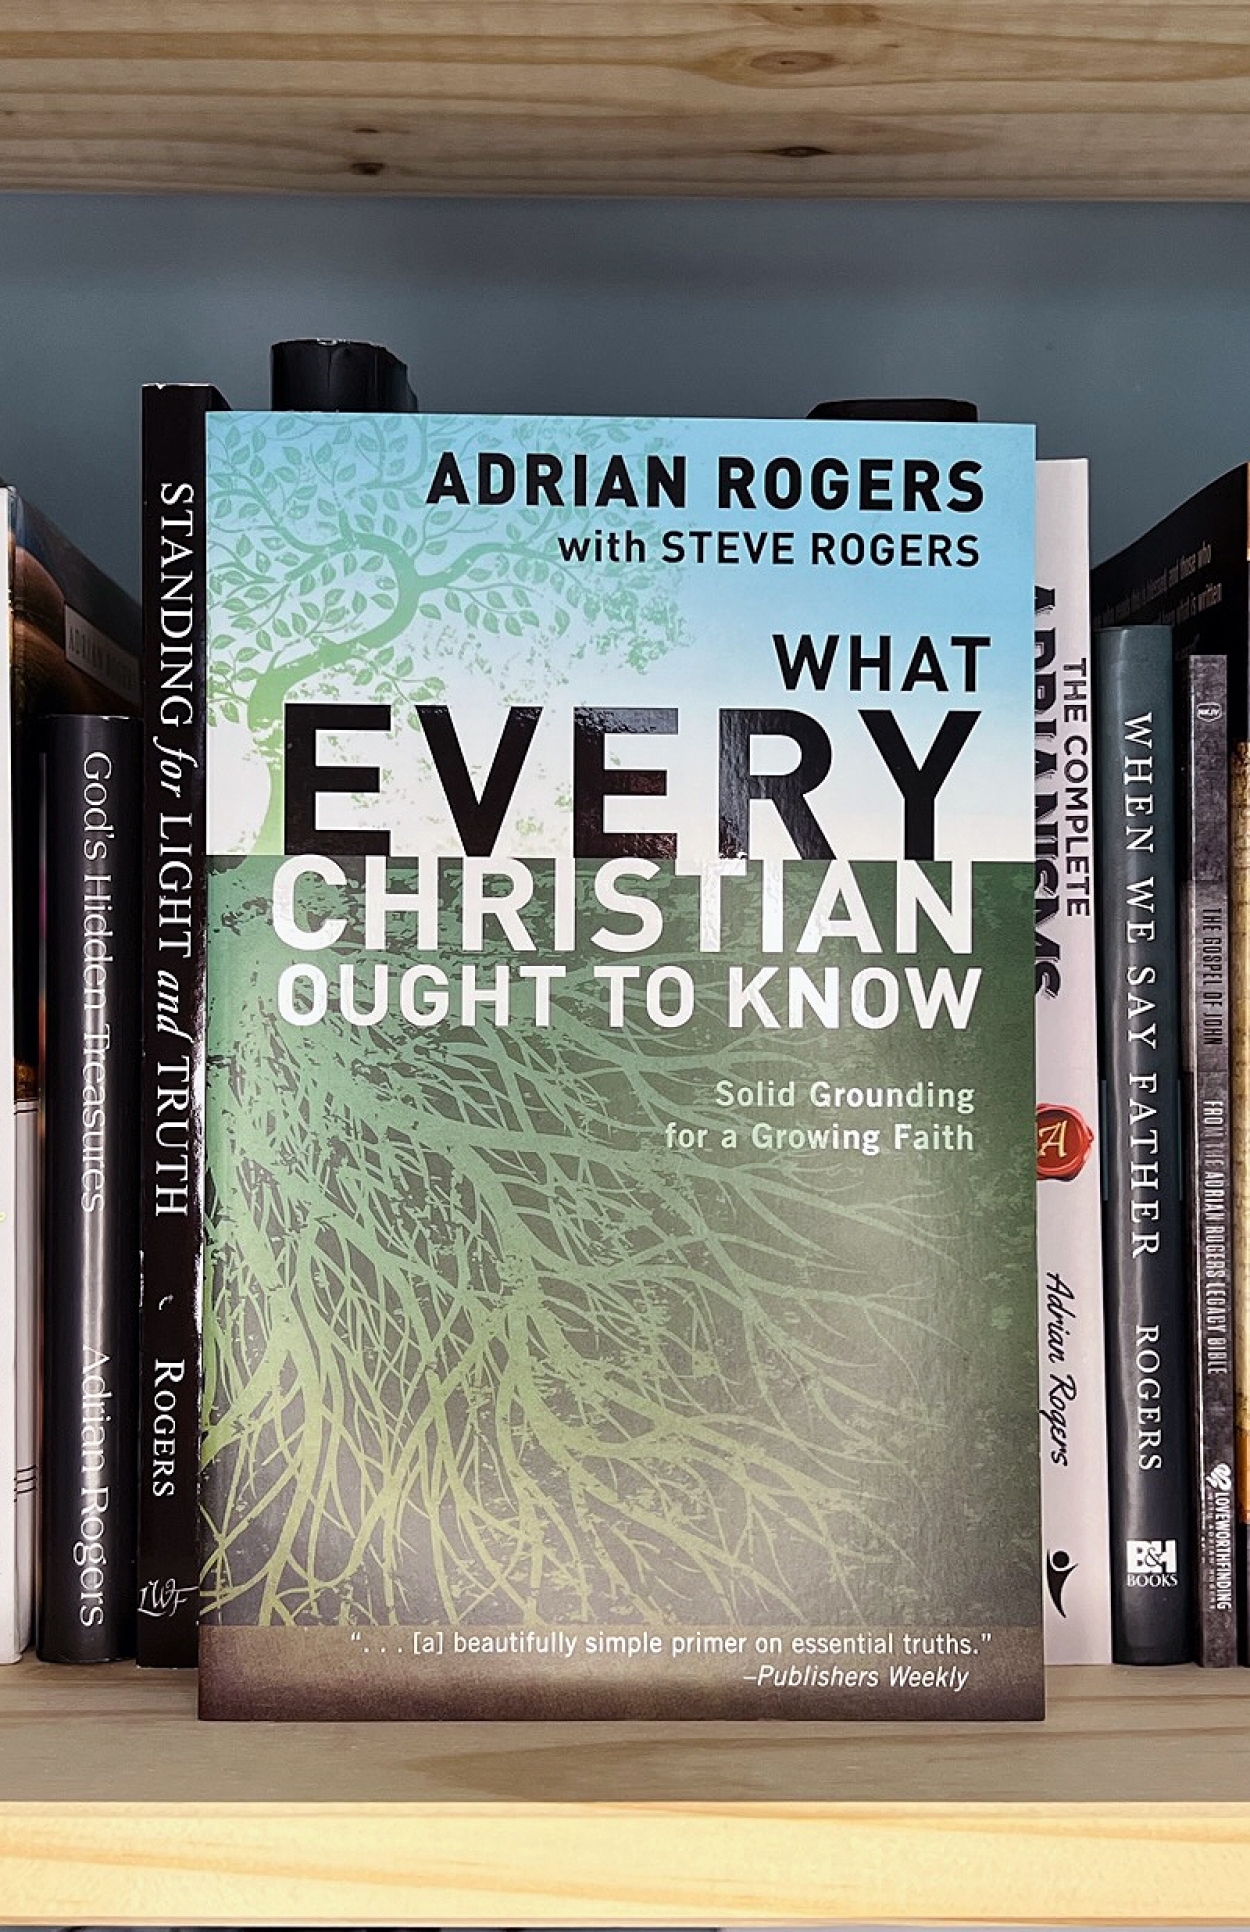 B123 what every christian ought to know book BOOKSHELF